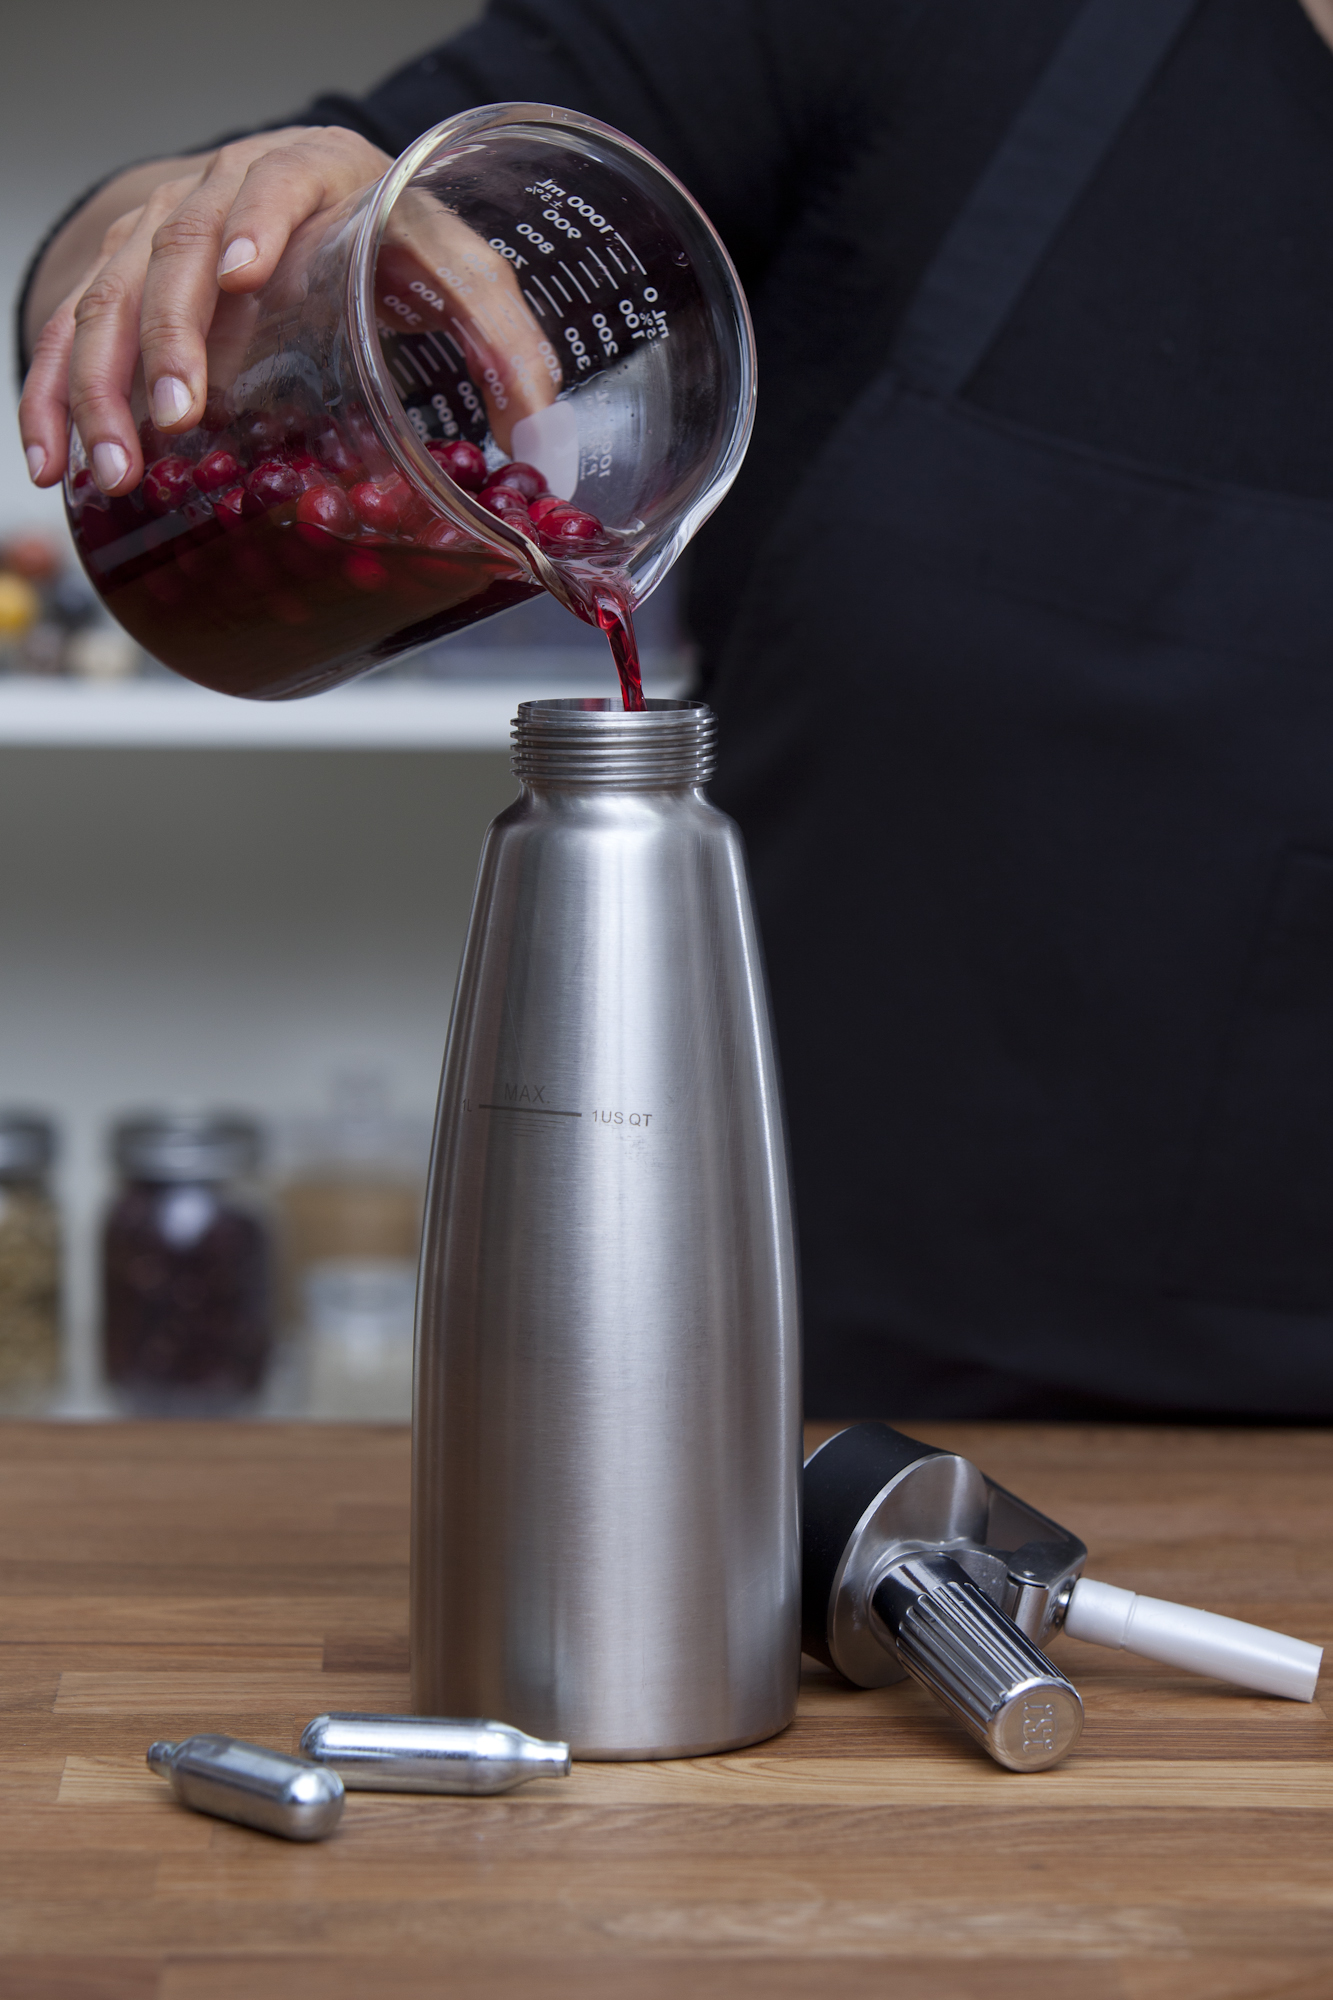 Soda siphons will not work in this recipe because they have a mechanism that does not allow for solids. You can, however, use a whipping siphon with carbon dioxide cartridges.